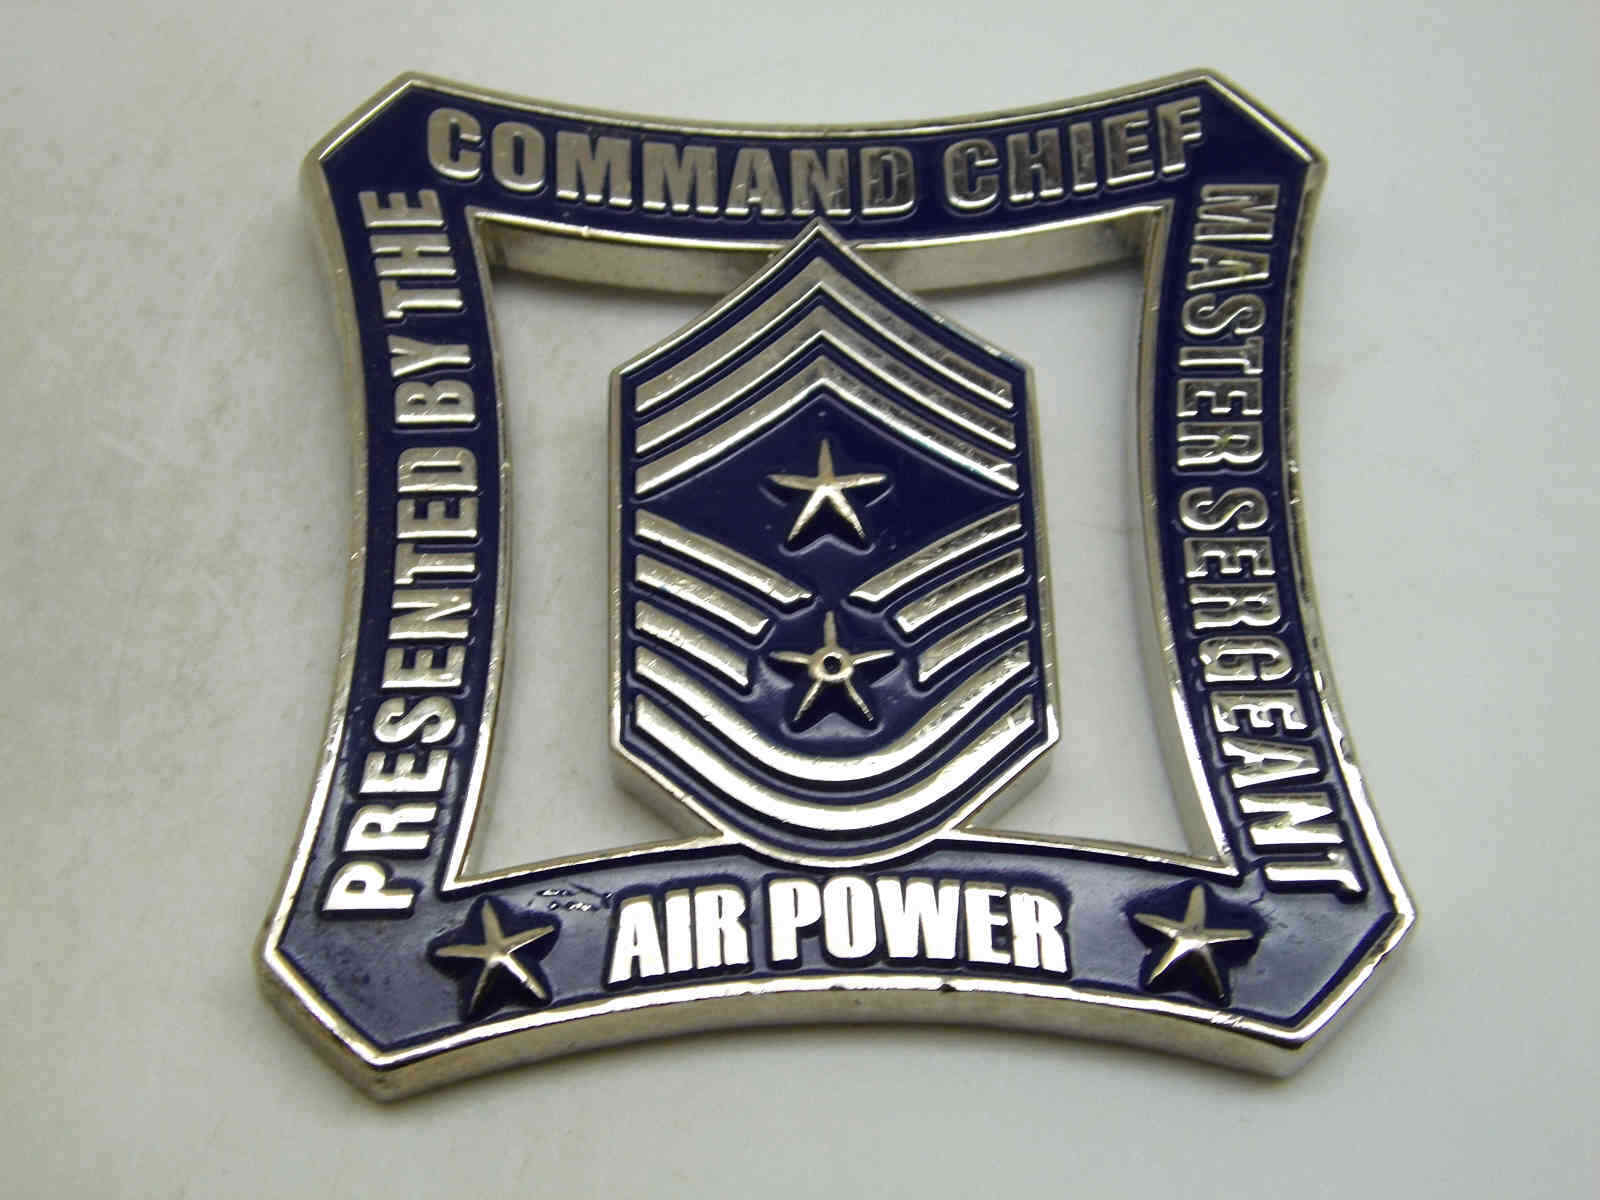 AIR POWER COMMAND CHIEF 11TH WING BOLLING AFB DC CHALLENGE COIN